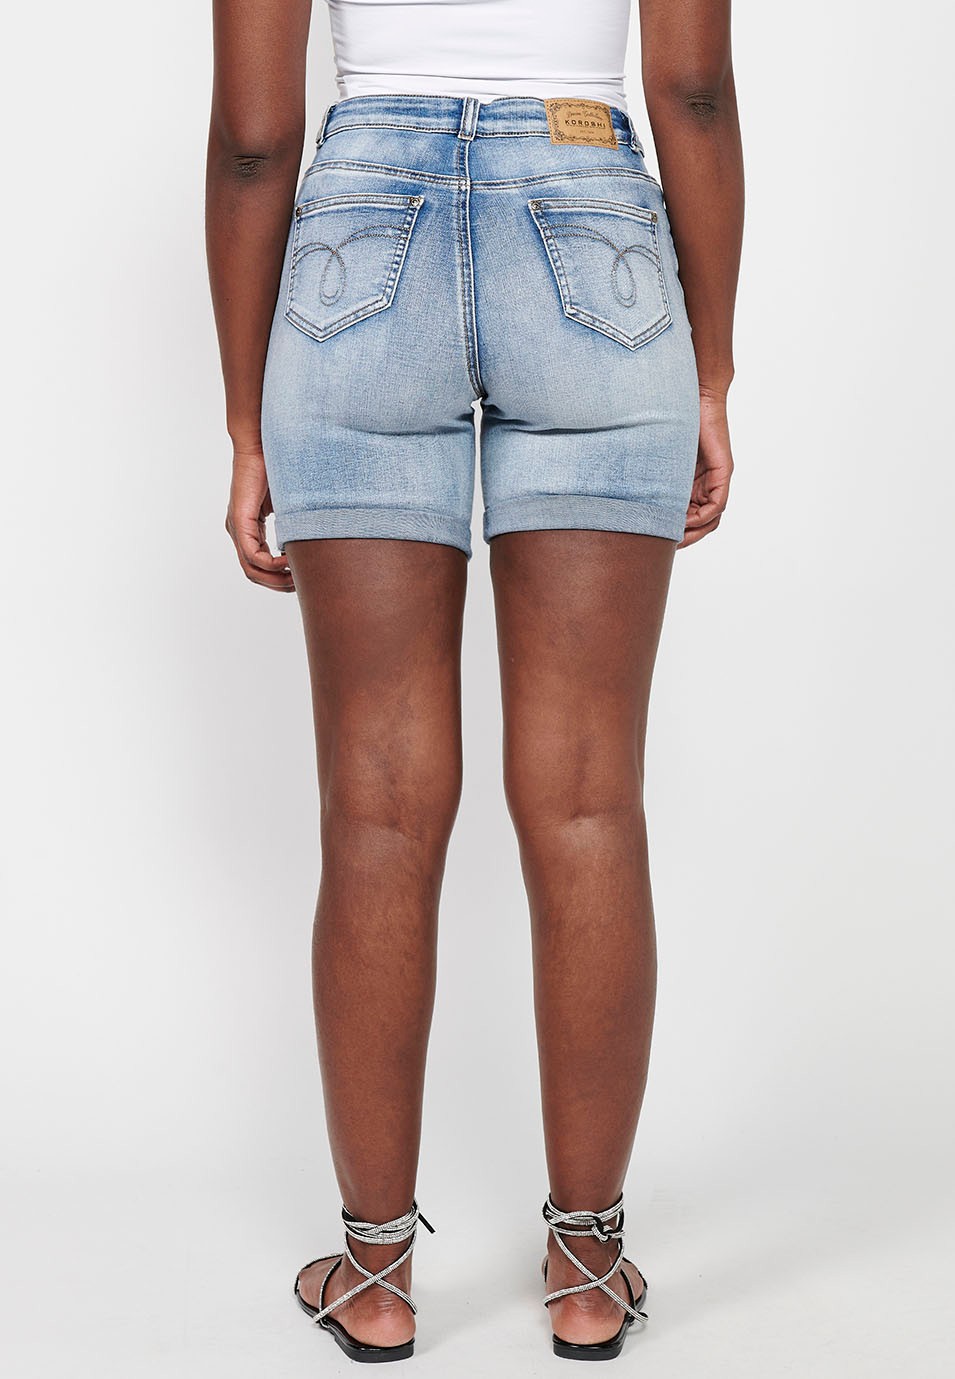 Blue Denim Shorts with Embroidered Details and Front Closure with Zipper and Button for Women 3